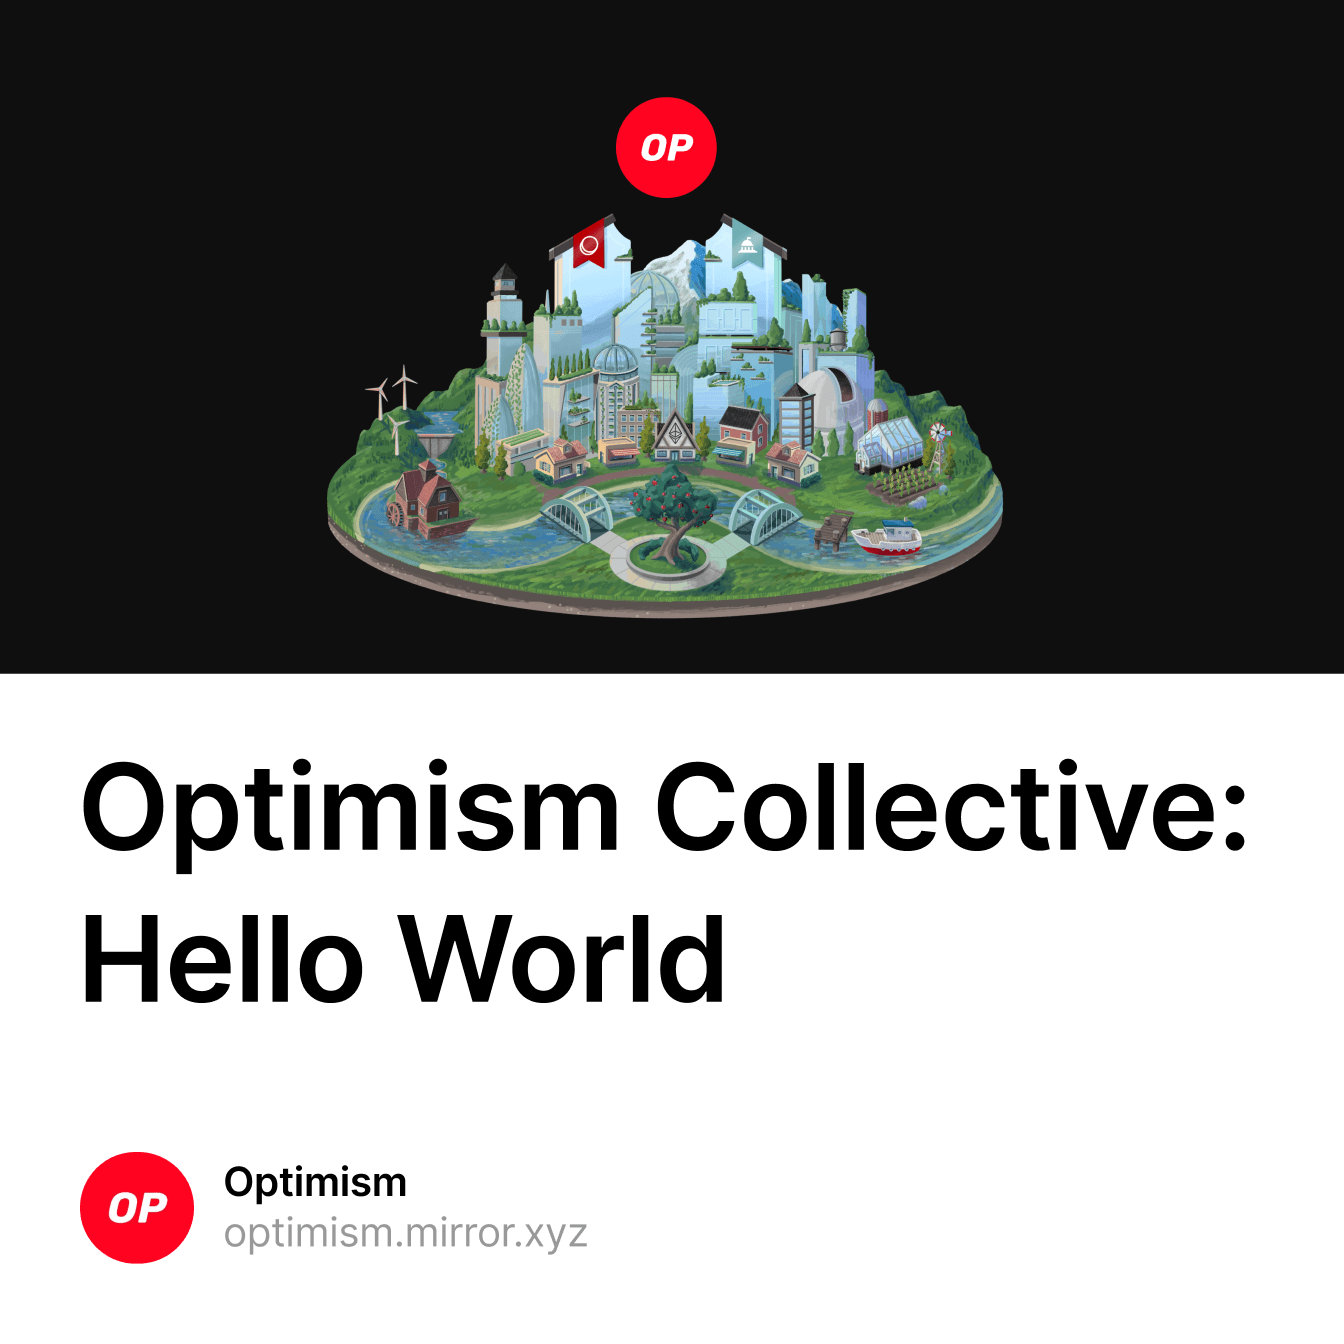 Introducing the Optimism Collective 451760/524120